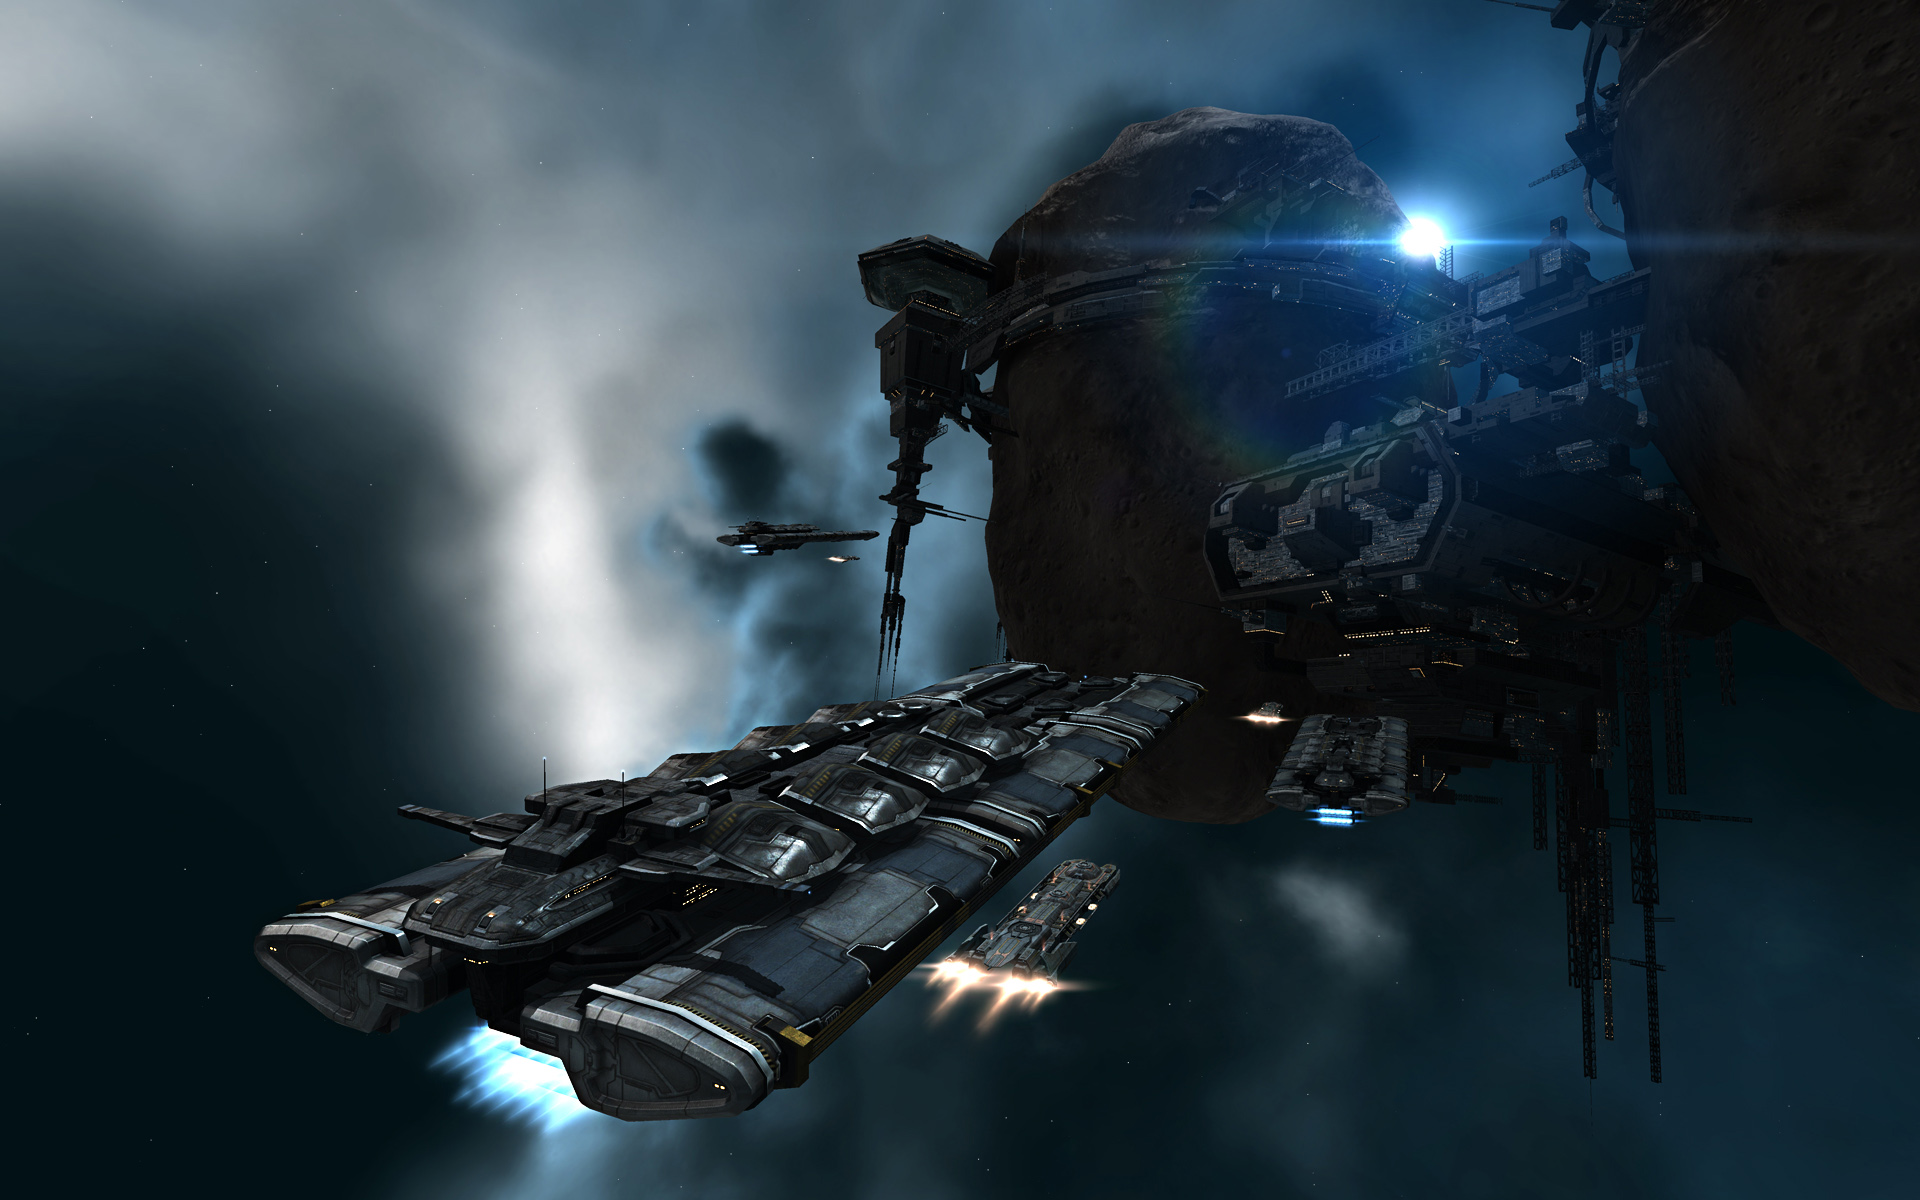 EVE Online's mesmerizing space scene with stars and a distant planet.